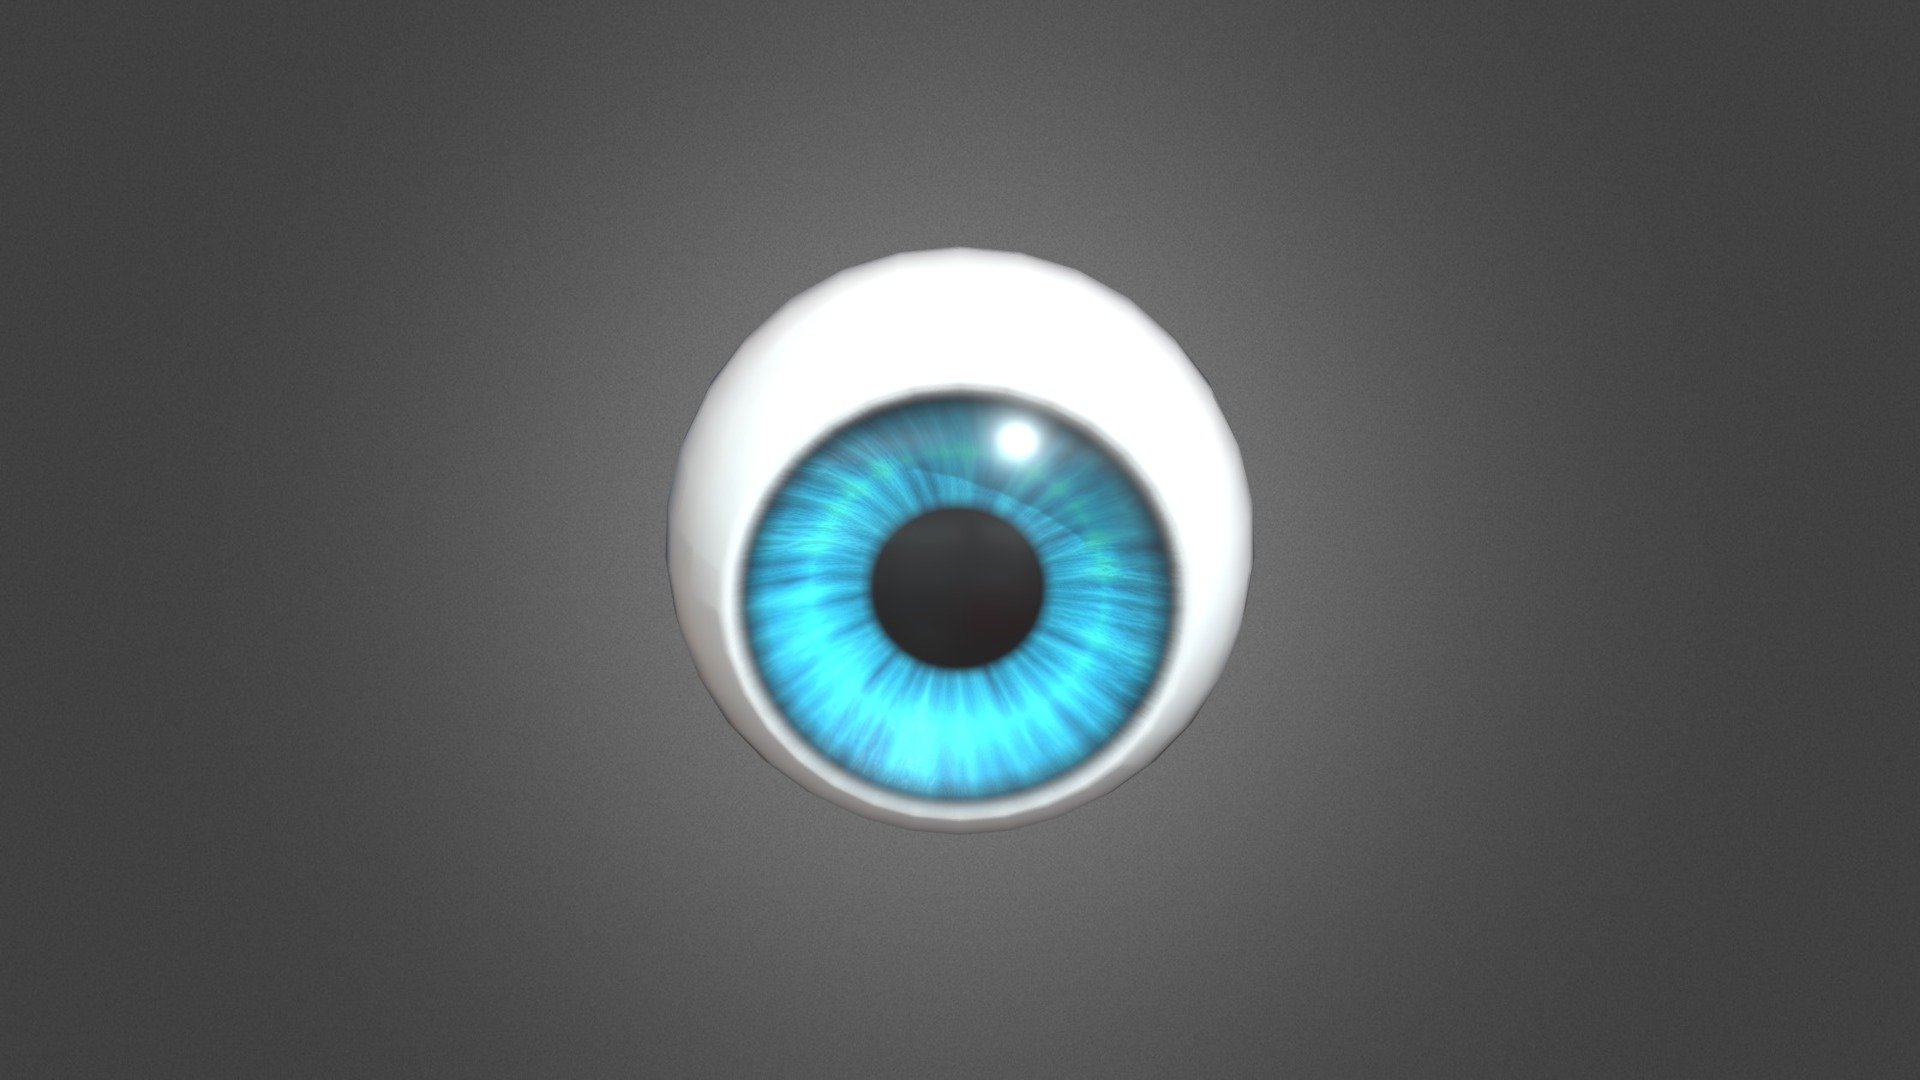 Model of a realistic human eye

If you want texture made with nodes in blender so you can change easier color of the eye here is a link to it: 
https://www.dropbox.com/s/l6gvin4term4dsc/eye_model_nodes.rar?dl=0 - Realistic human eye model - Download Free 3D model by BananowyTasimic 3d model